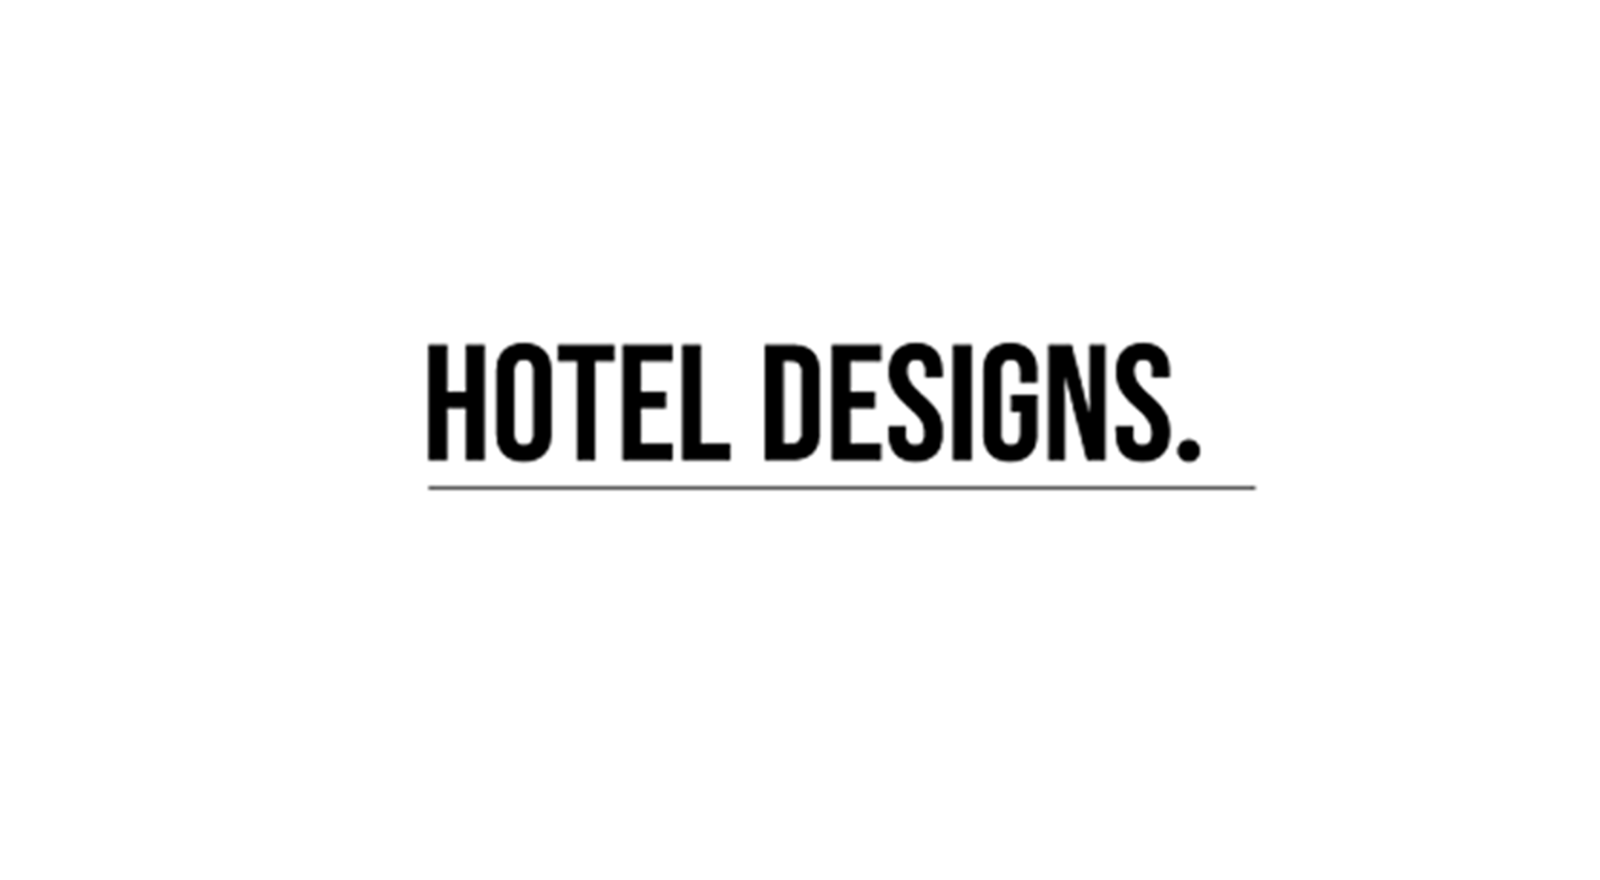 Press Release - Timage are featured in 'Hotel Designs' for July